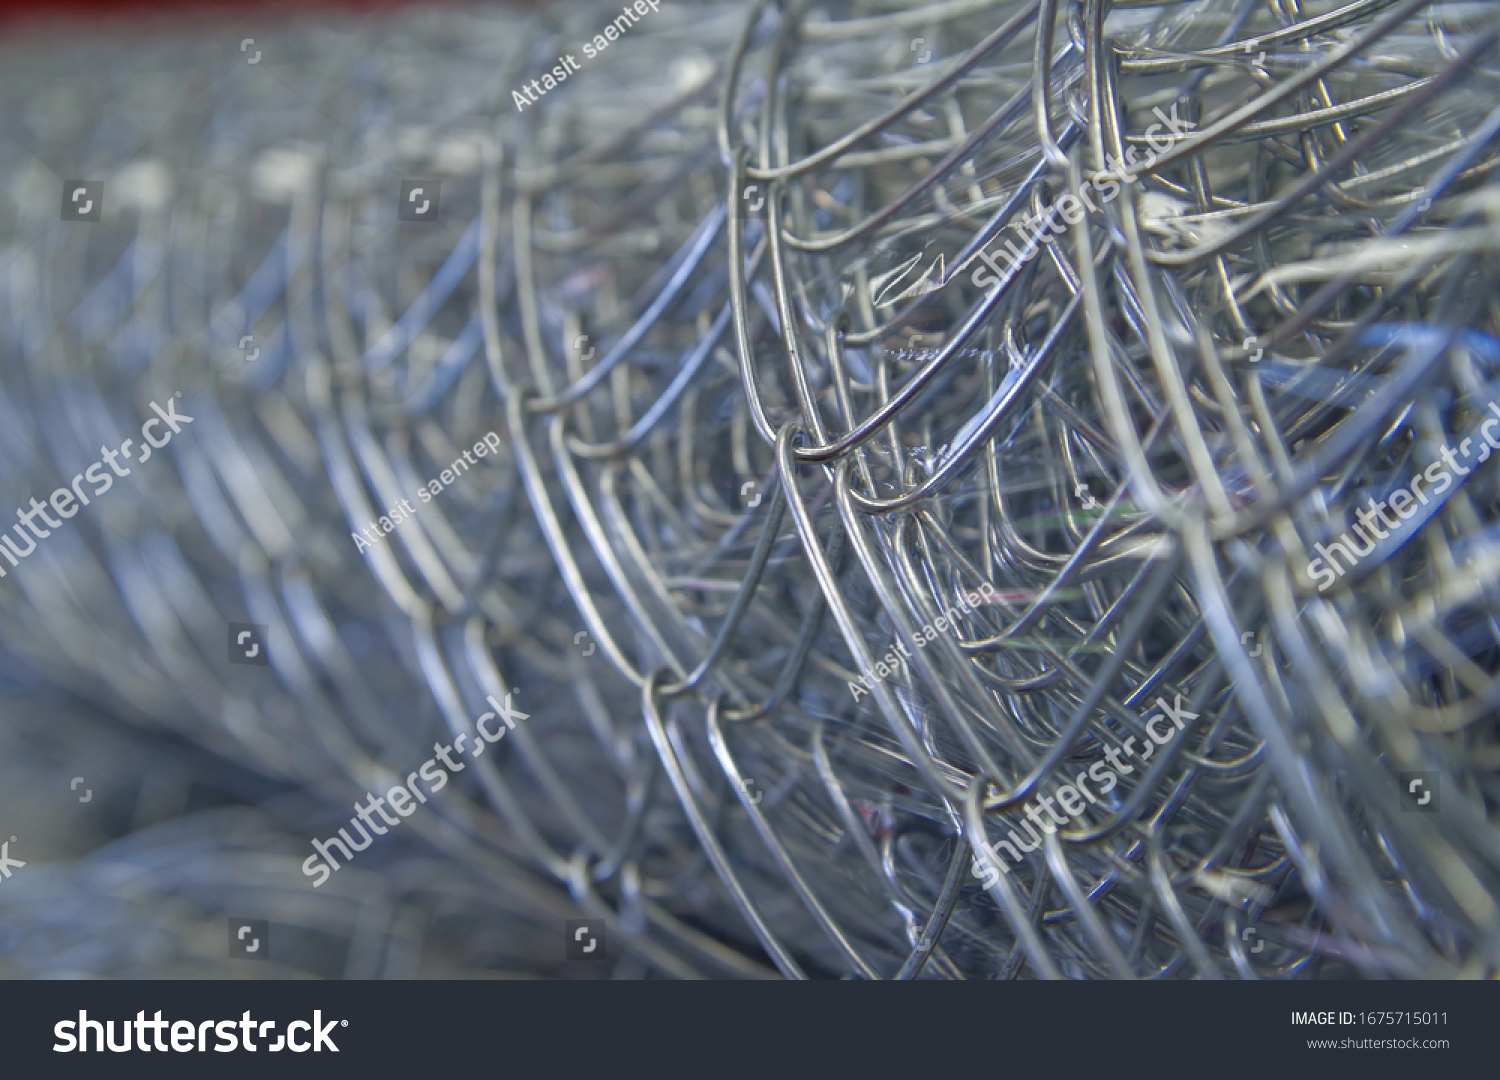 Rolls of chain link fence wire mesh placed them in storage awaiting for sell or disposal wire fence. seamless chain link fence. industrial fence #1675715011